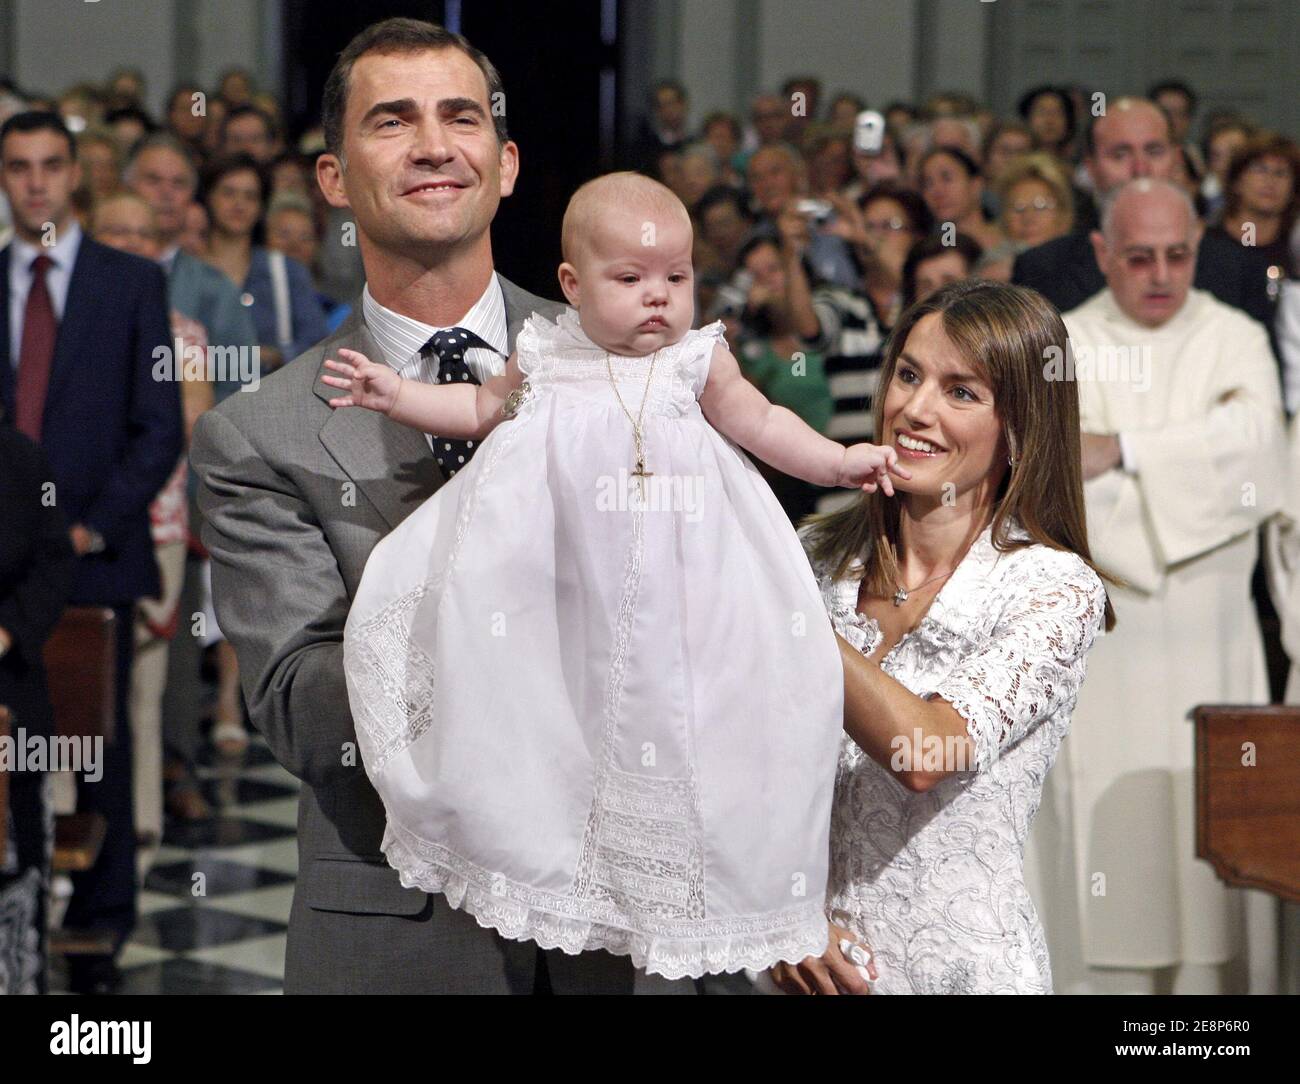 Spanish Crown Prince Felipe de Borbon (L) and his wife Princess Letizia (R) present her second daughter Princess Sofia (C) to the Virgin of Atocha during a ceremony celebrated at Atocha Basilica in Madrid, central Spain on September 19, 2007. Asking the Virgin of Atocha protection for Princess Sofia they are faithful to an ancient tradition of the Spanish Royal Family. Photo by Angel Diaz/Pool/ABACAPRESS.COM Stock Photo